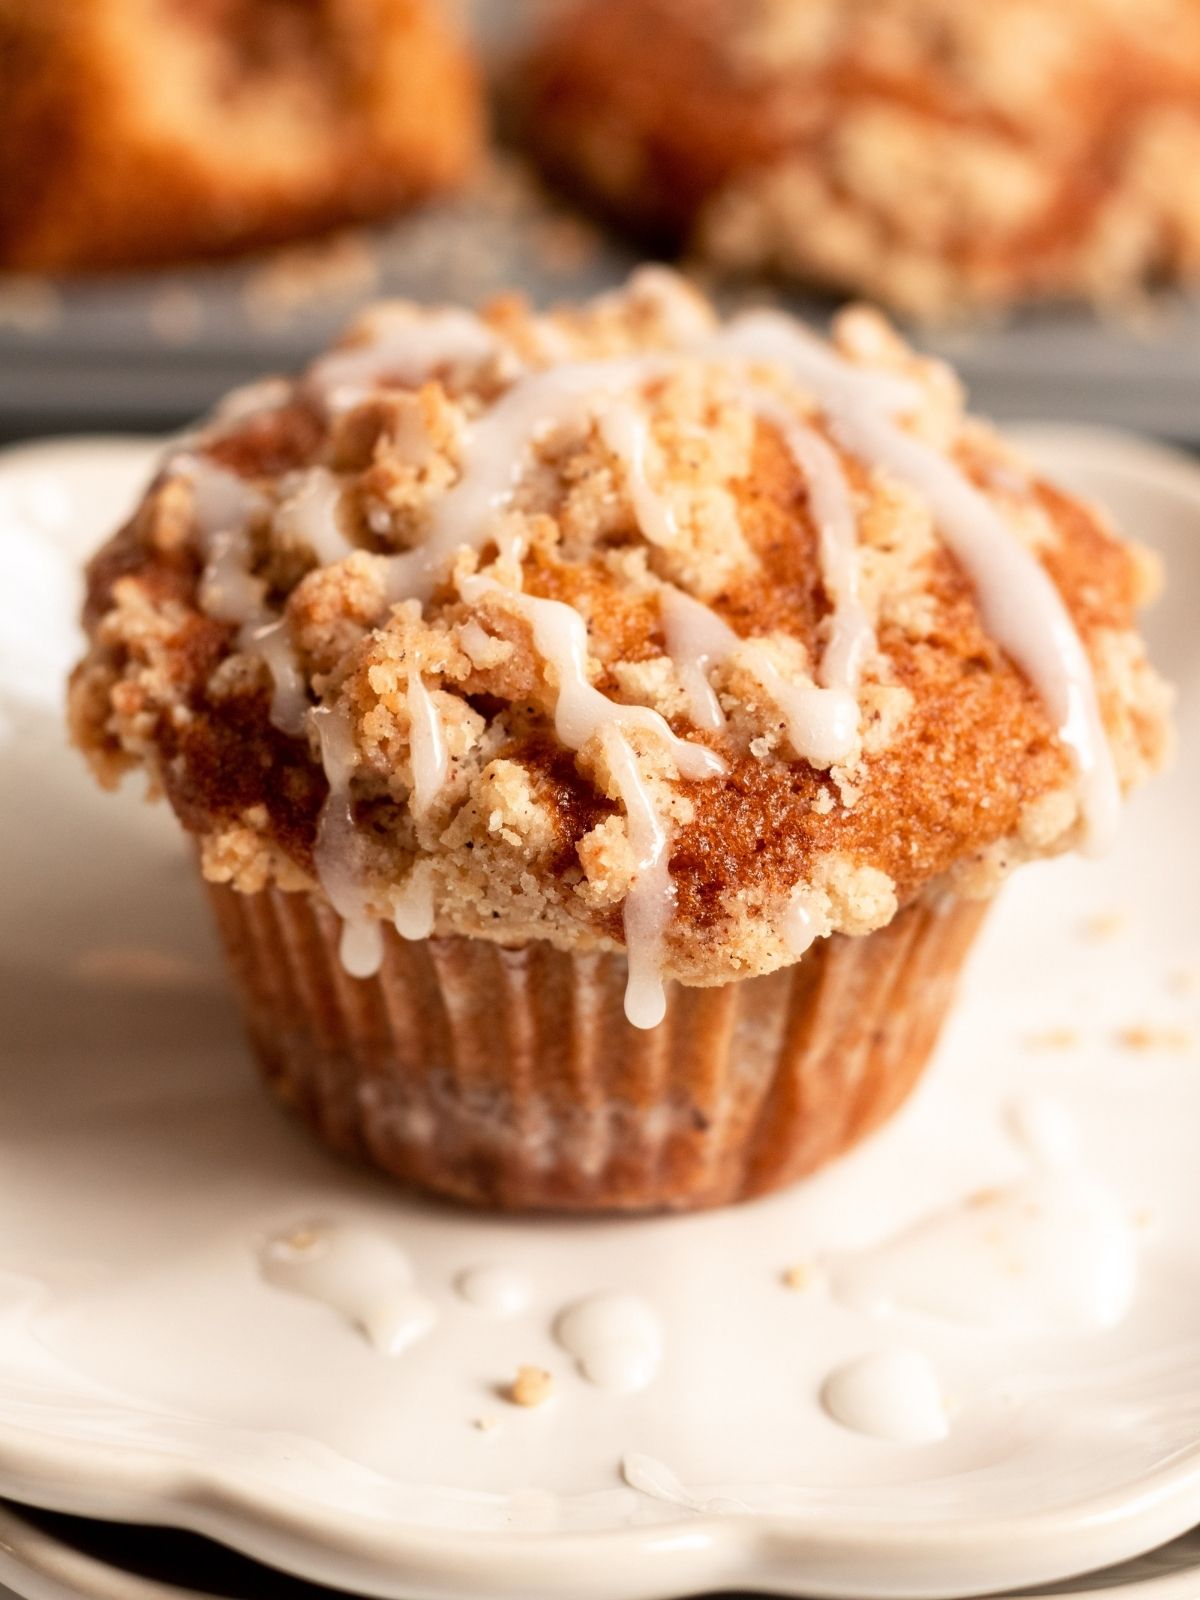 Coffee cake muffin on a small plate with glaze on top.